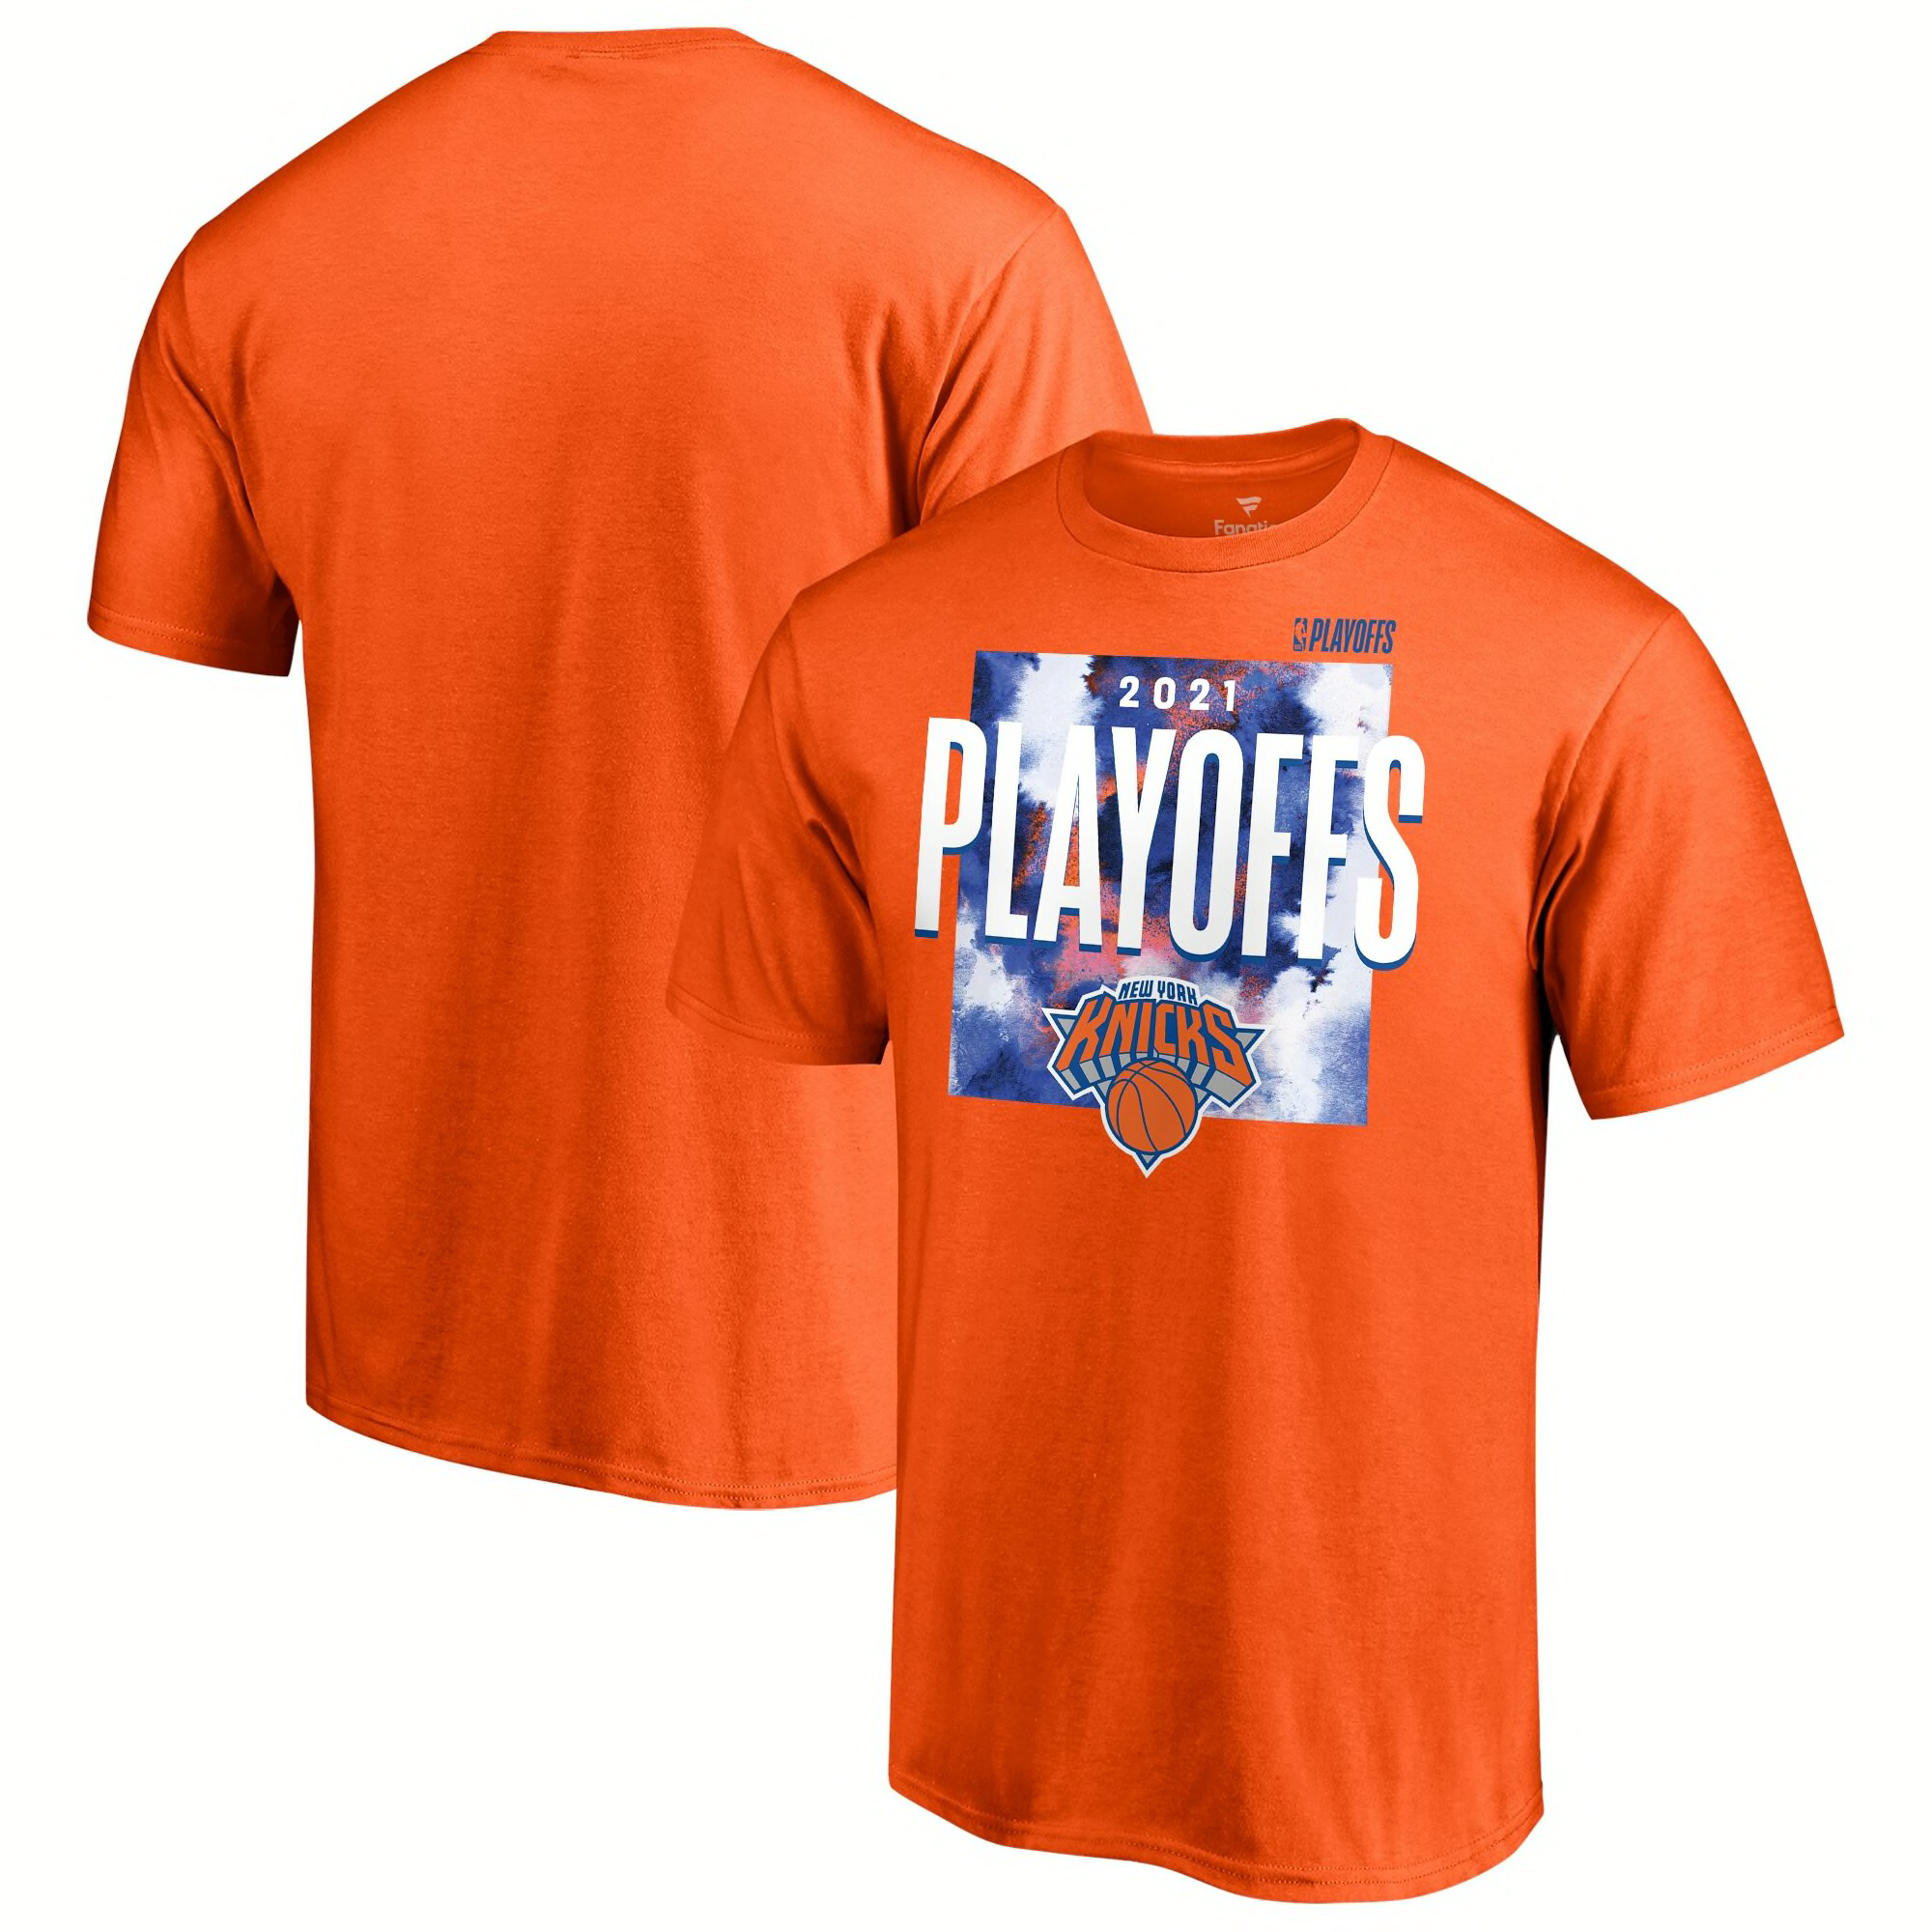 Get Ready For The Nba Playoffs With New York Knicks Gear